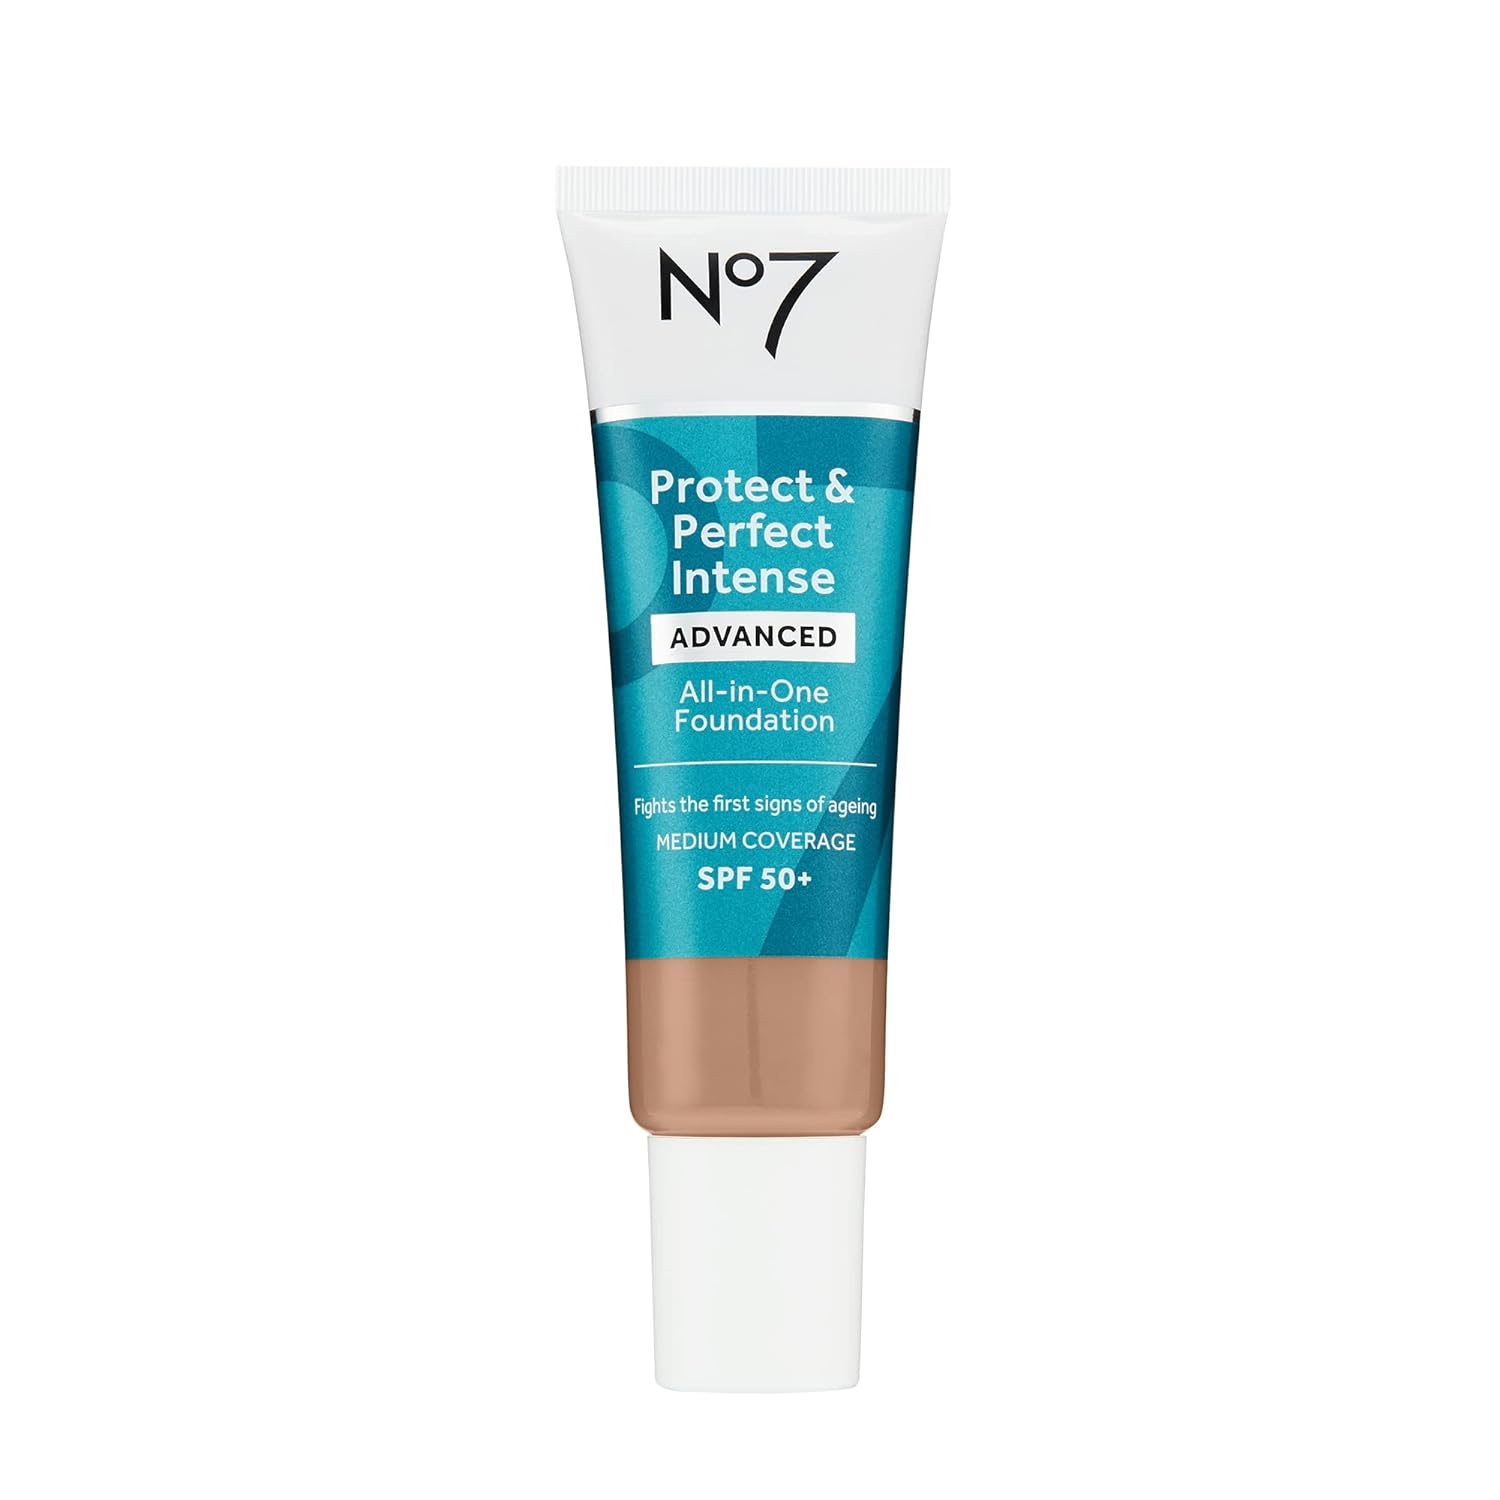 No7 Protect & Perfect Advanced All in One Foundation - Wheat - Age Defying Foundation Makeup with SPF 50 for Women - Makeup Base Cream Helps to Reduces Redness & Blurs Visible Pores (30)